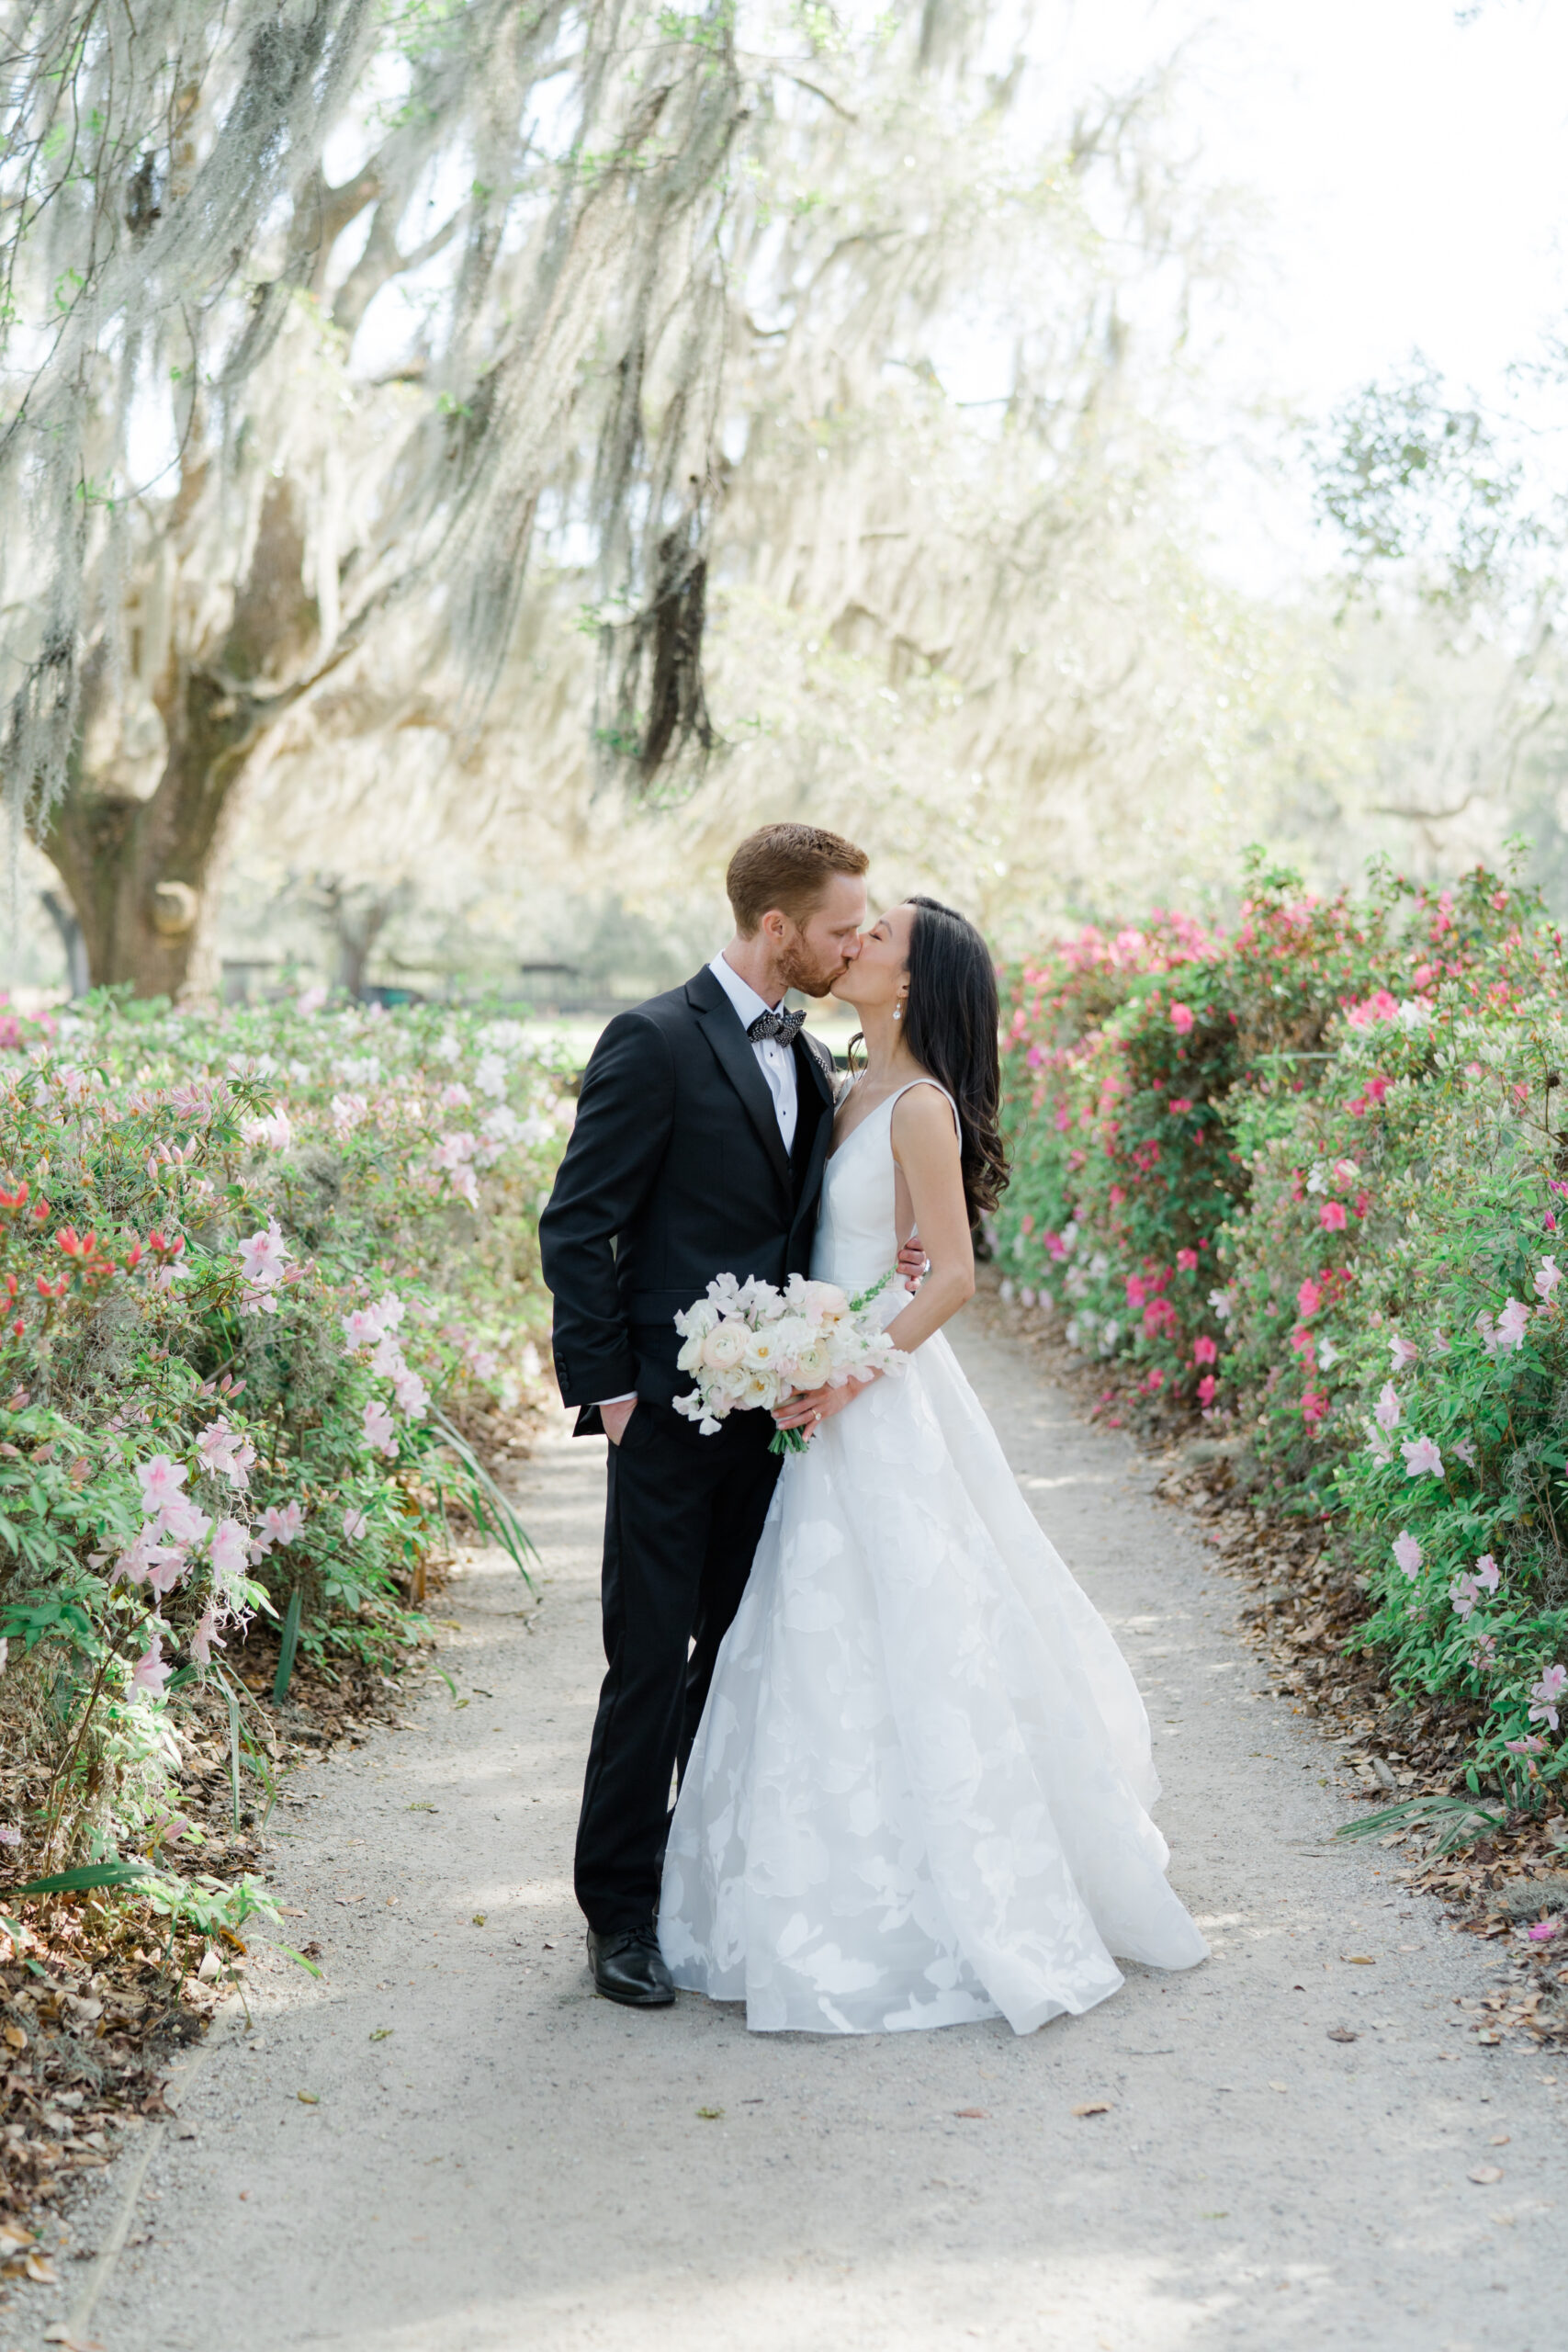 Bride and groom portraits at Middleton Place with azalea bushes blooming.